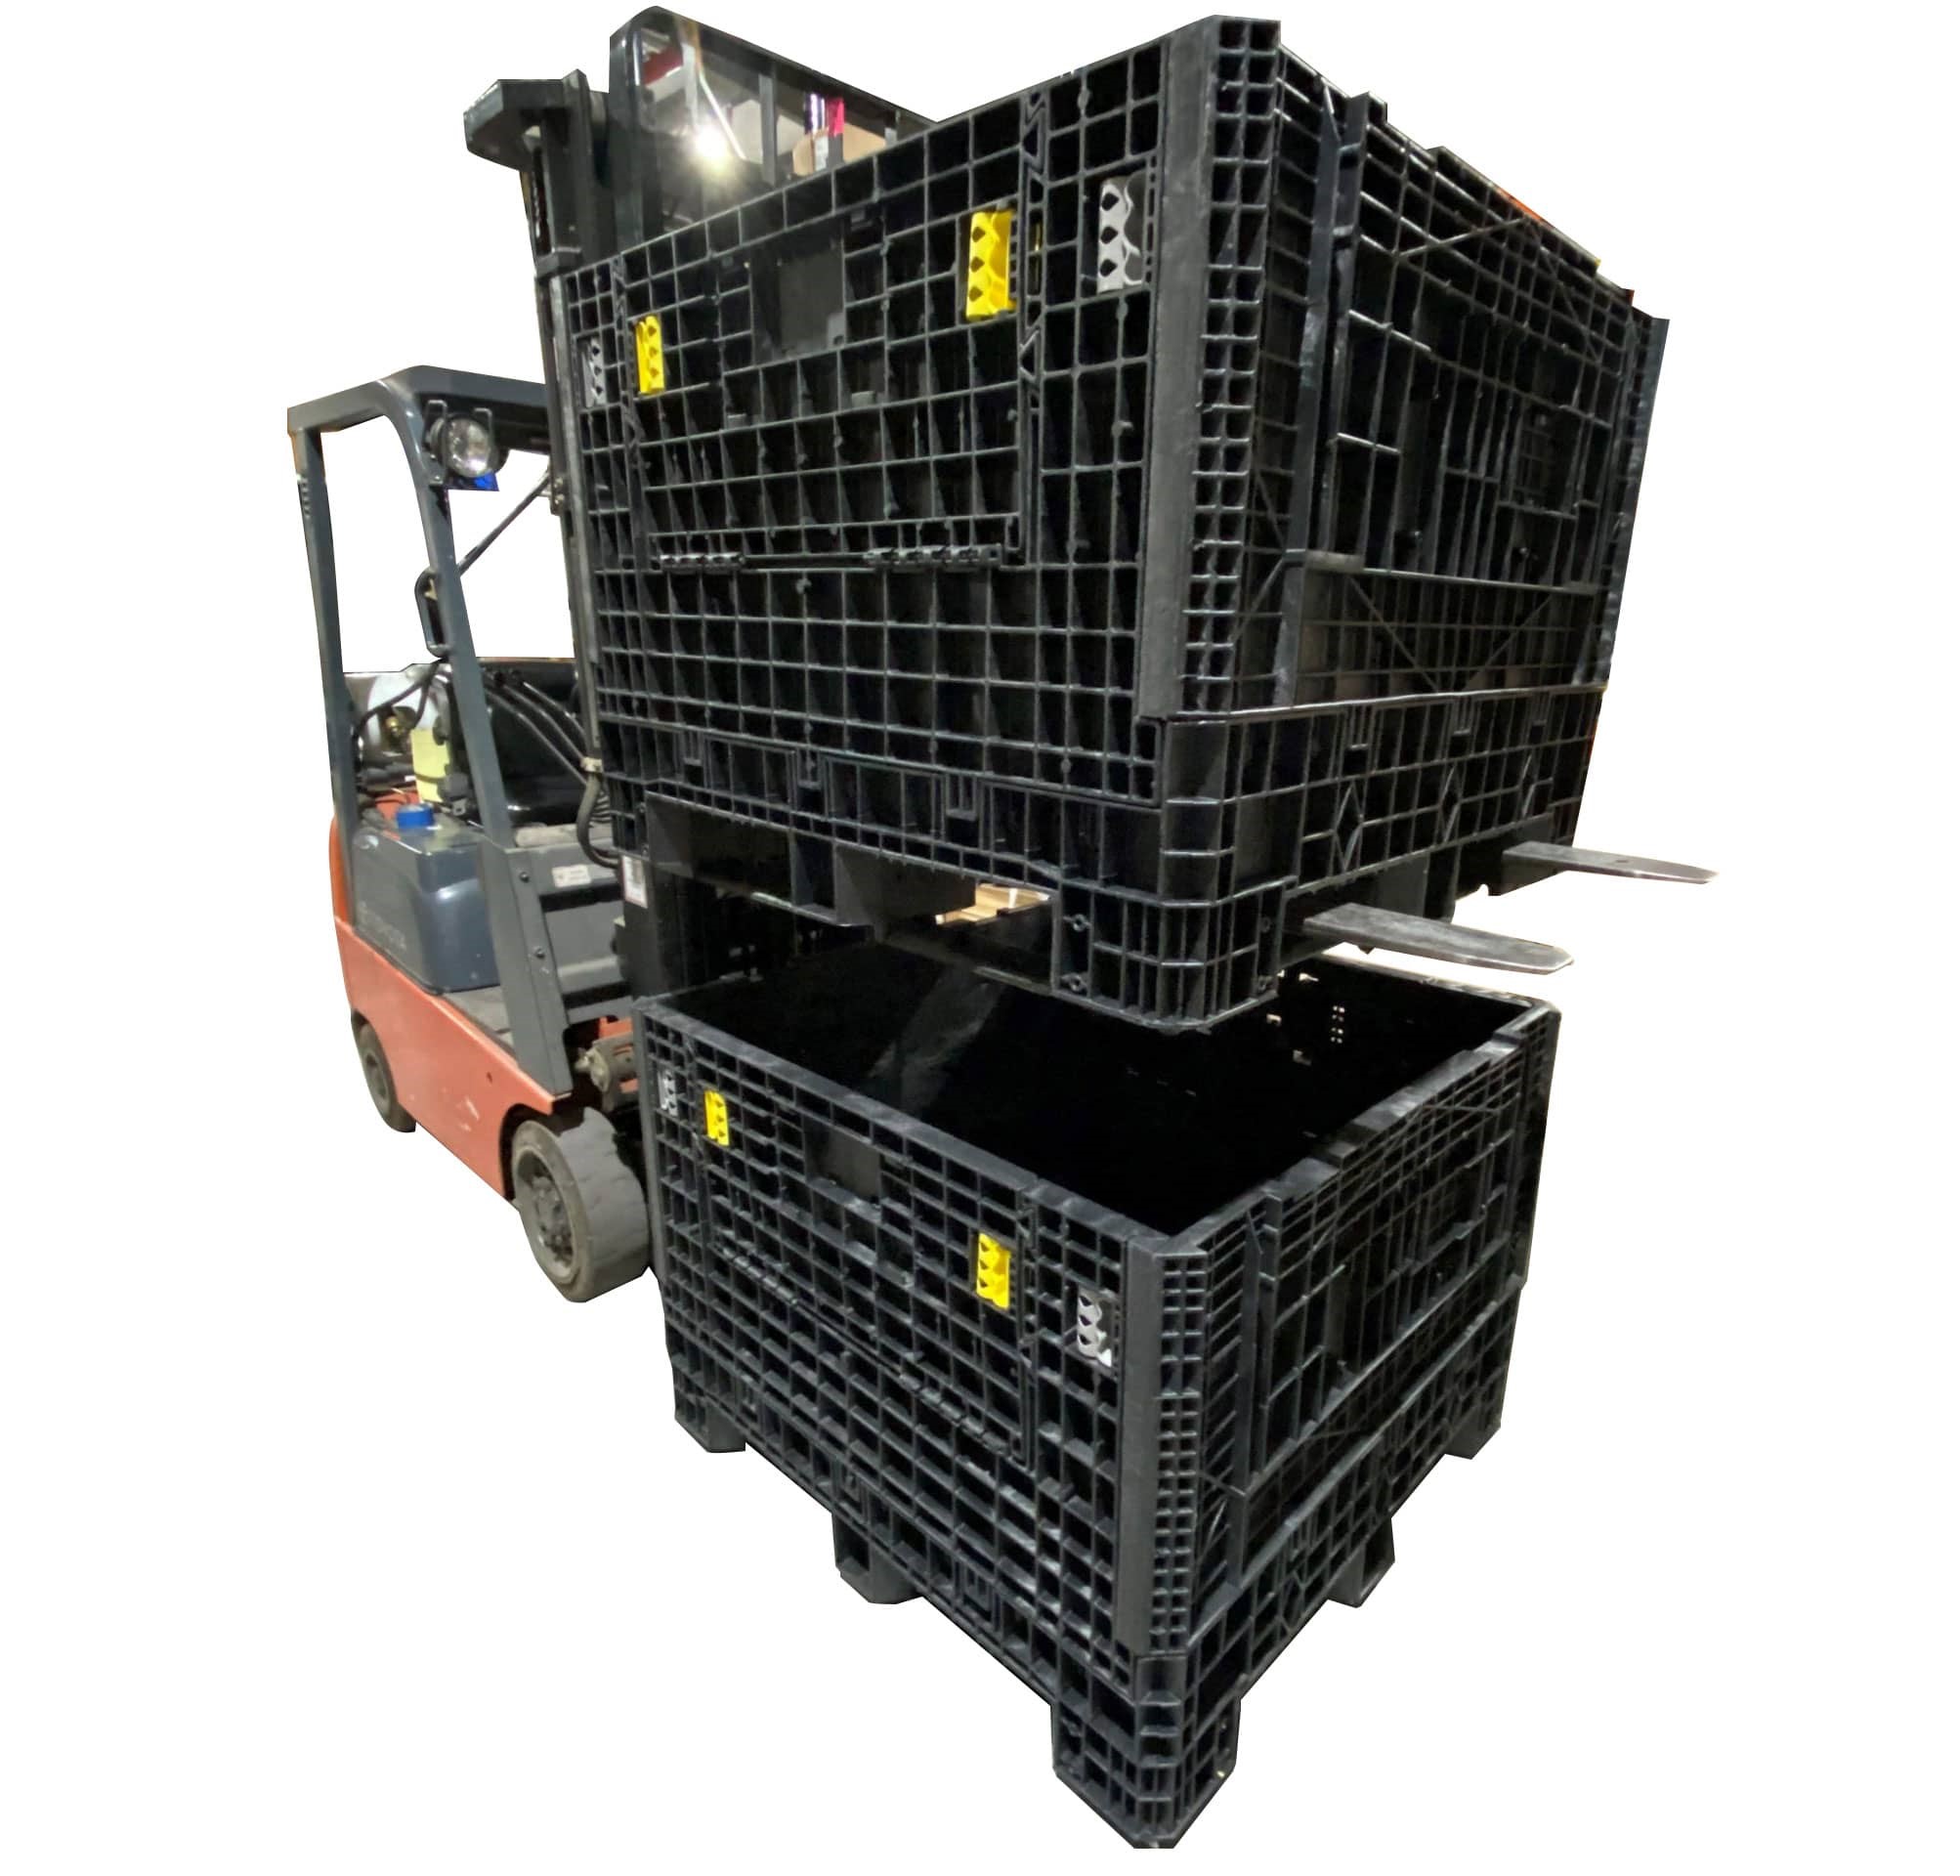 https://rackandshelf.com/wp-content/uploads/2015/05/Collapsble-Bulk-Container-Stacked-with-Forklift.jpg